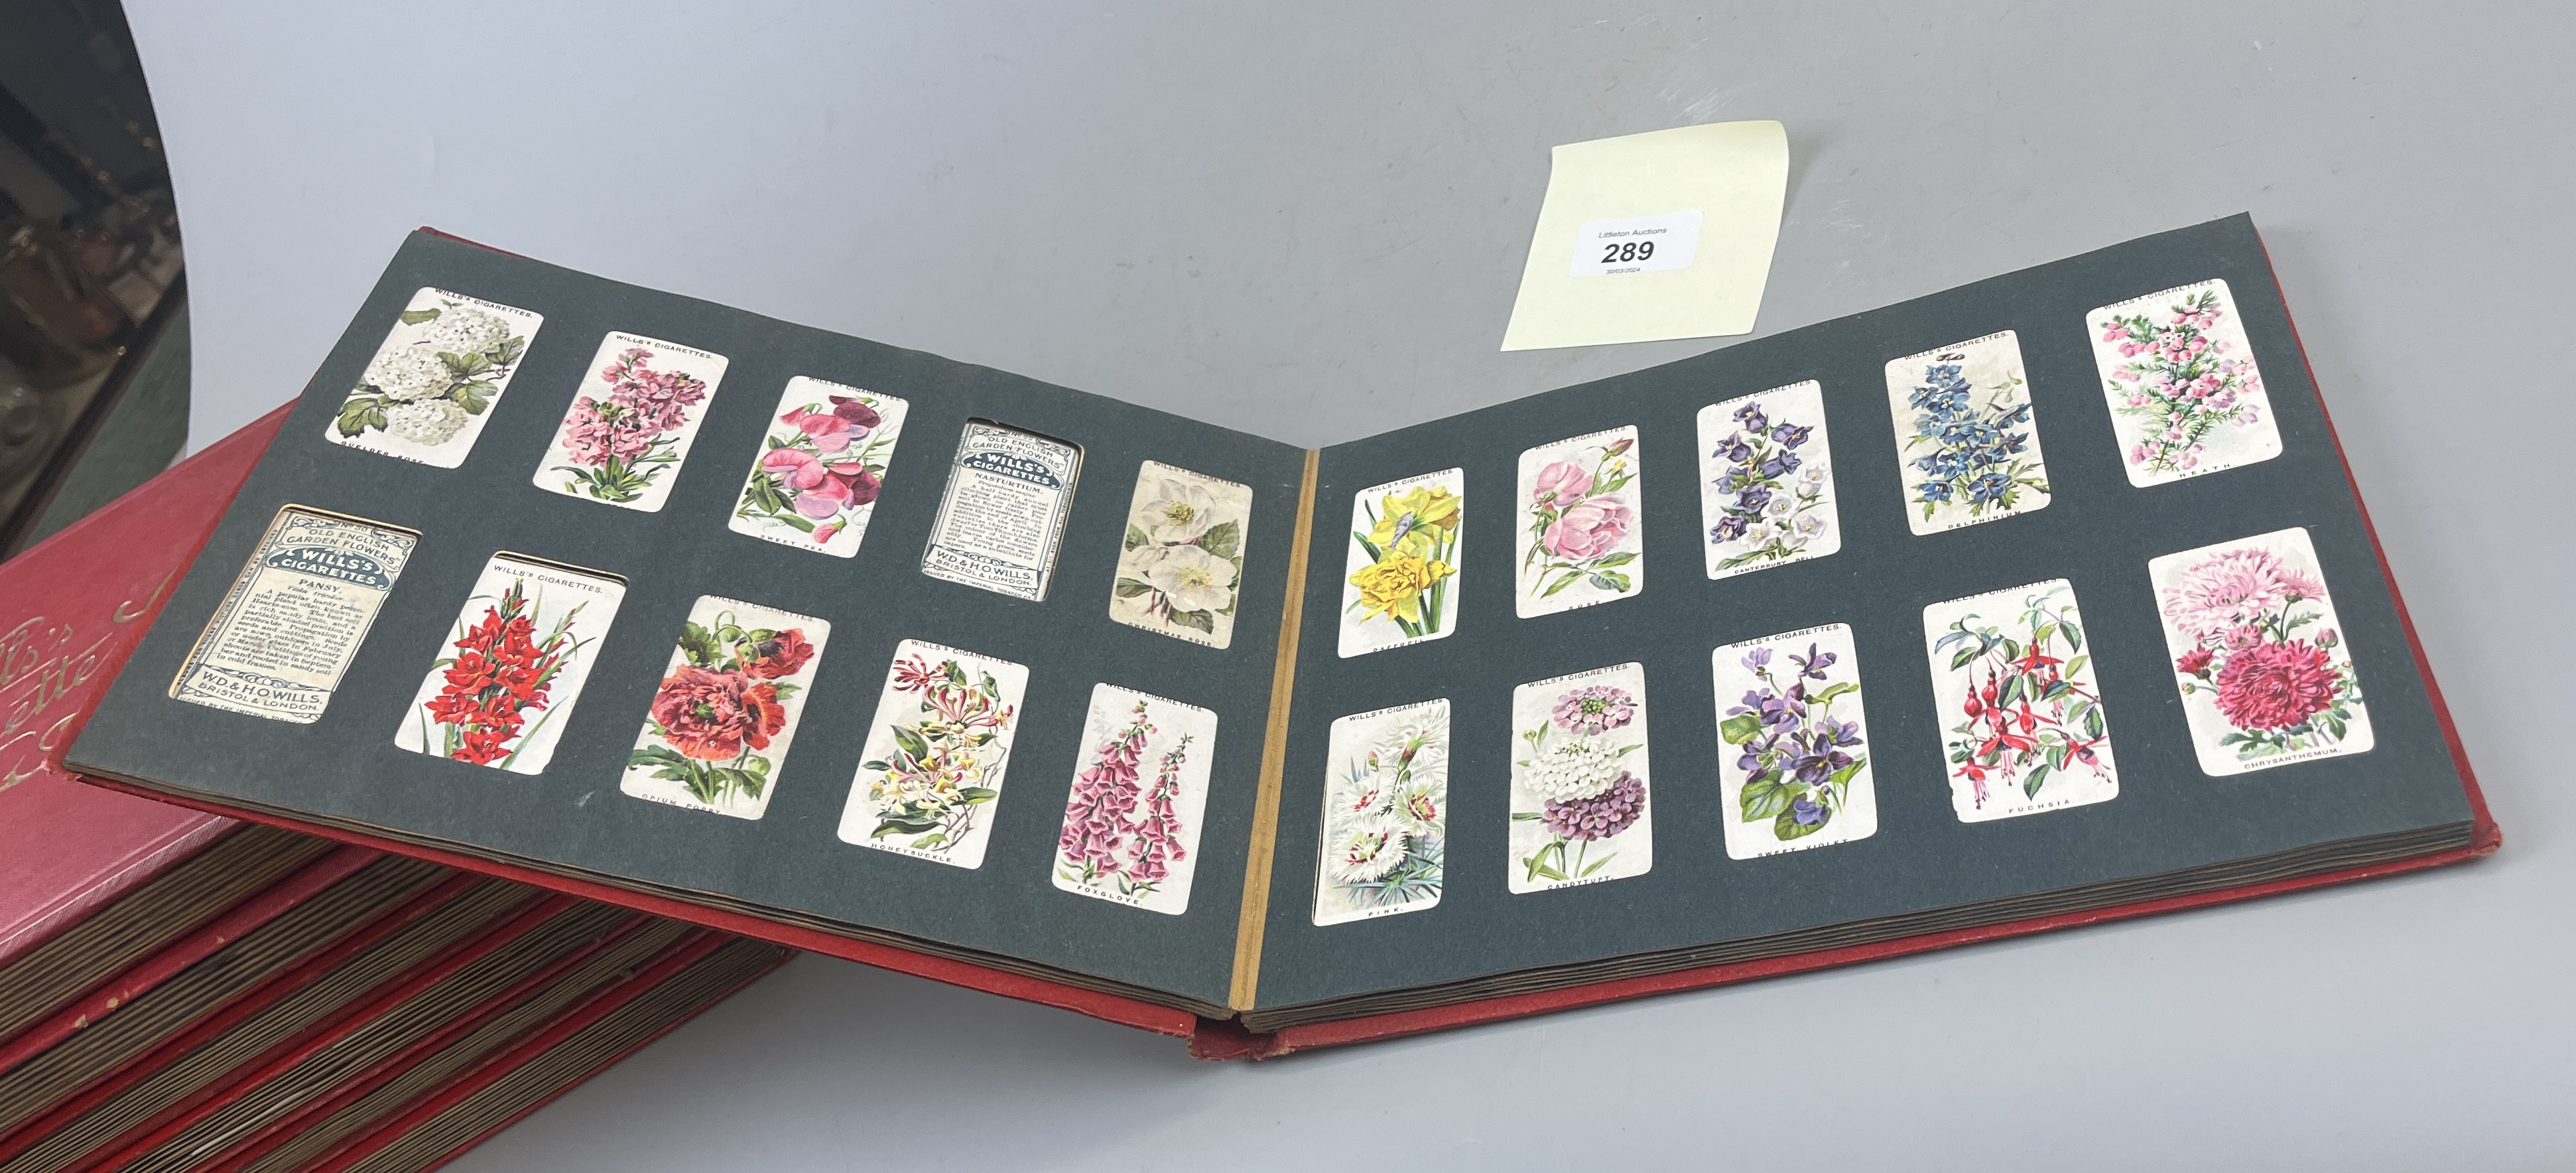 7 well populated Wills cigarette albums - Image 4 of 44